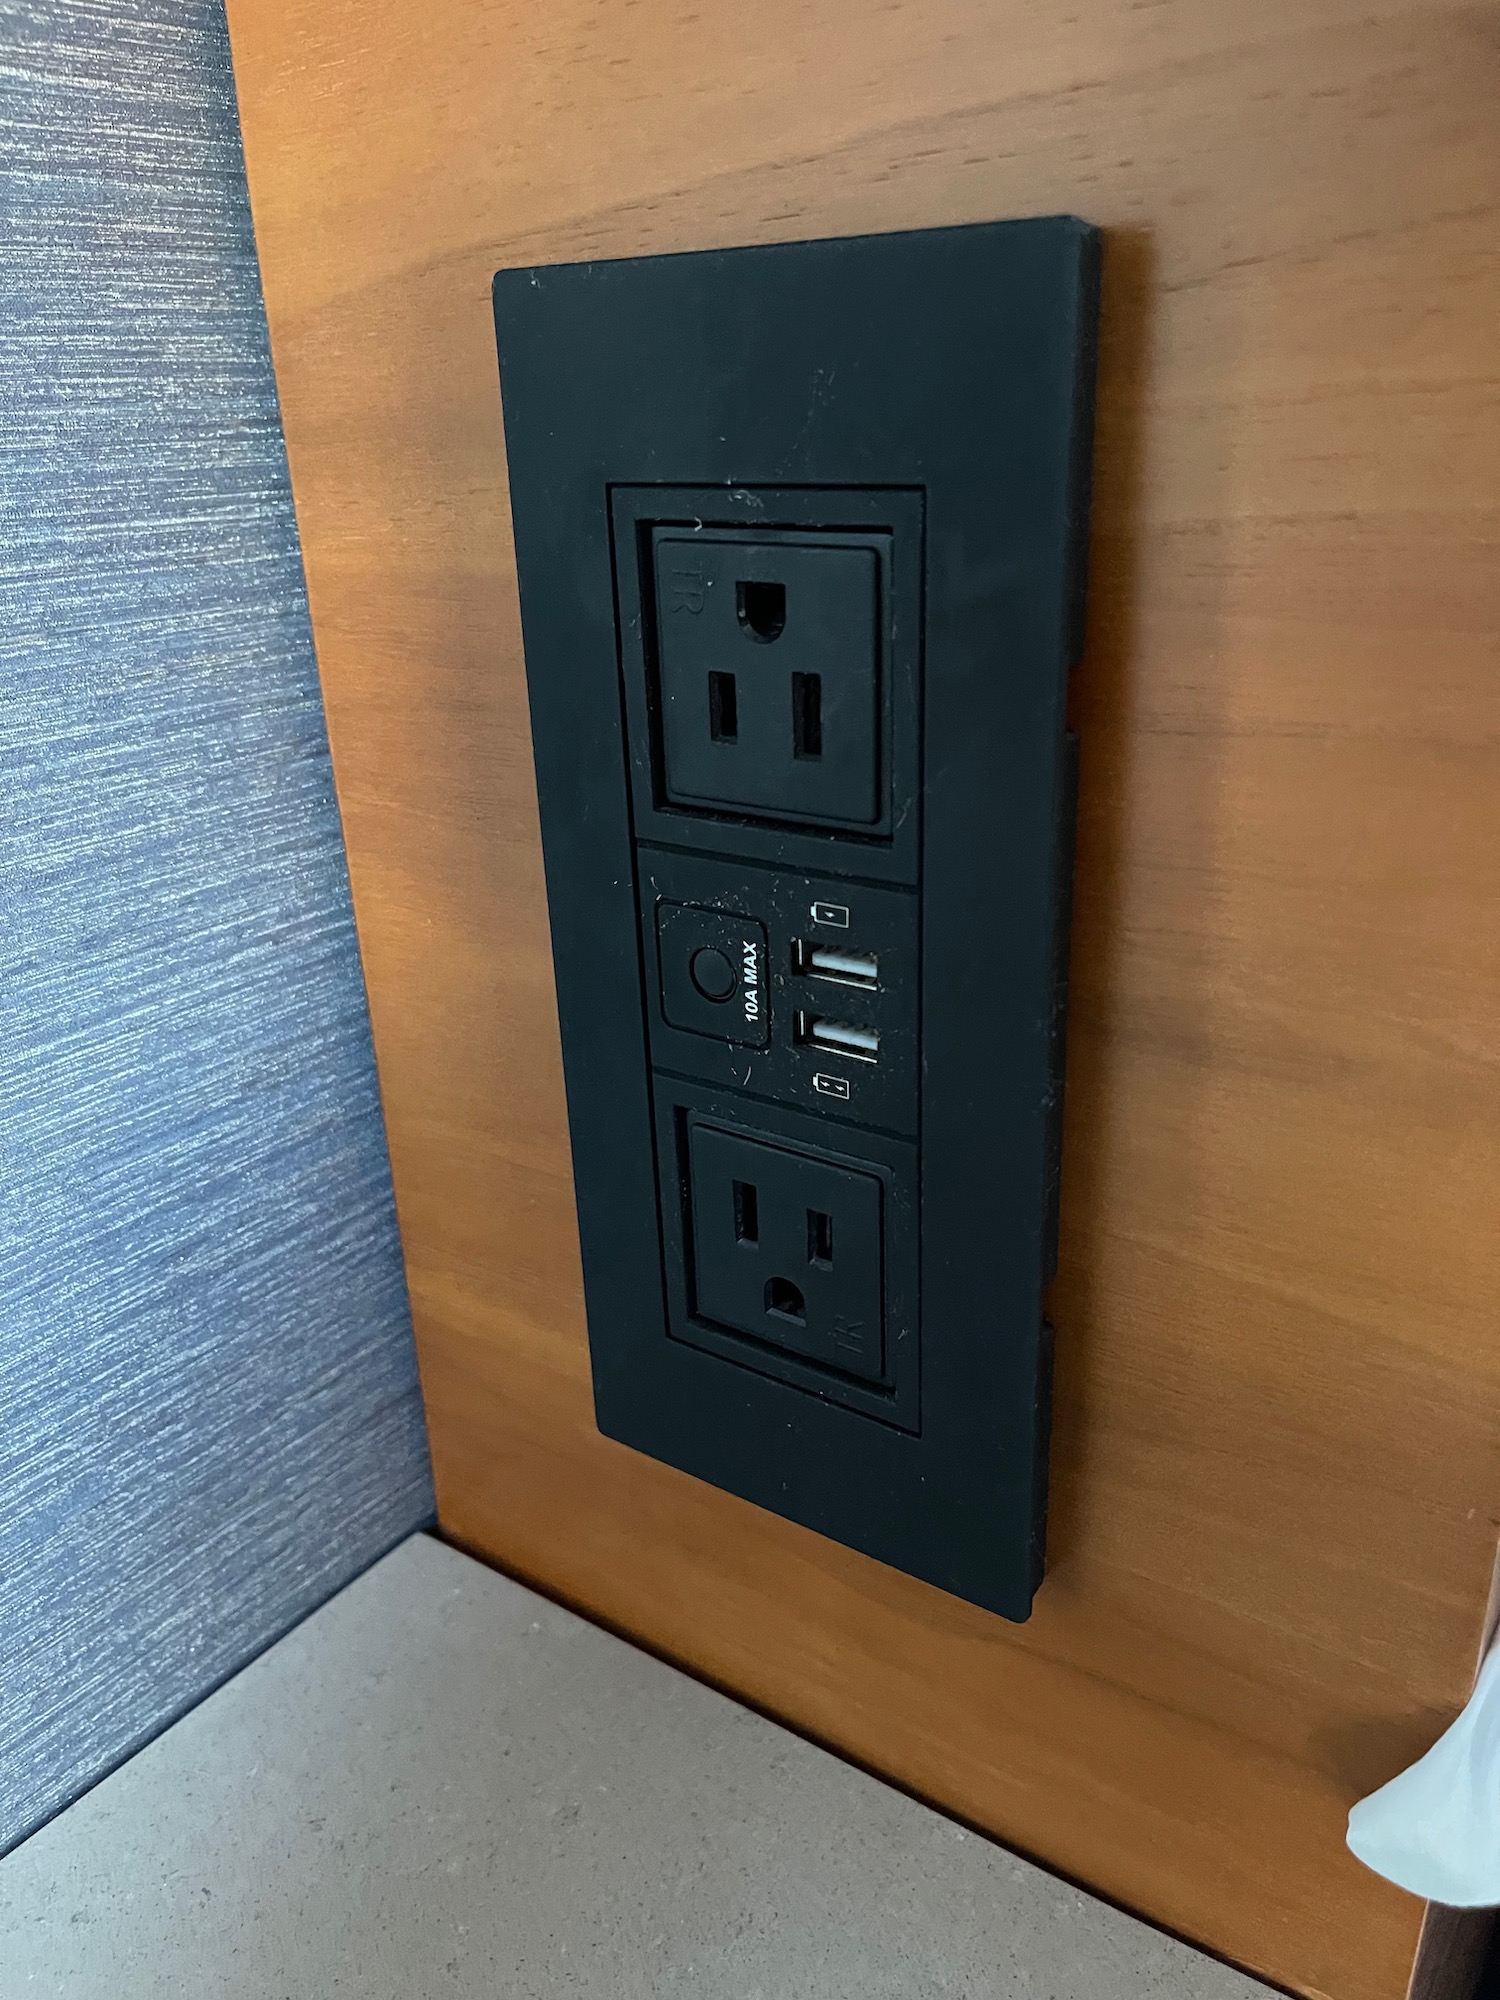 a black electrical outlet on a wood surface